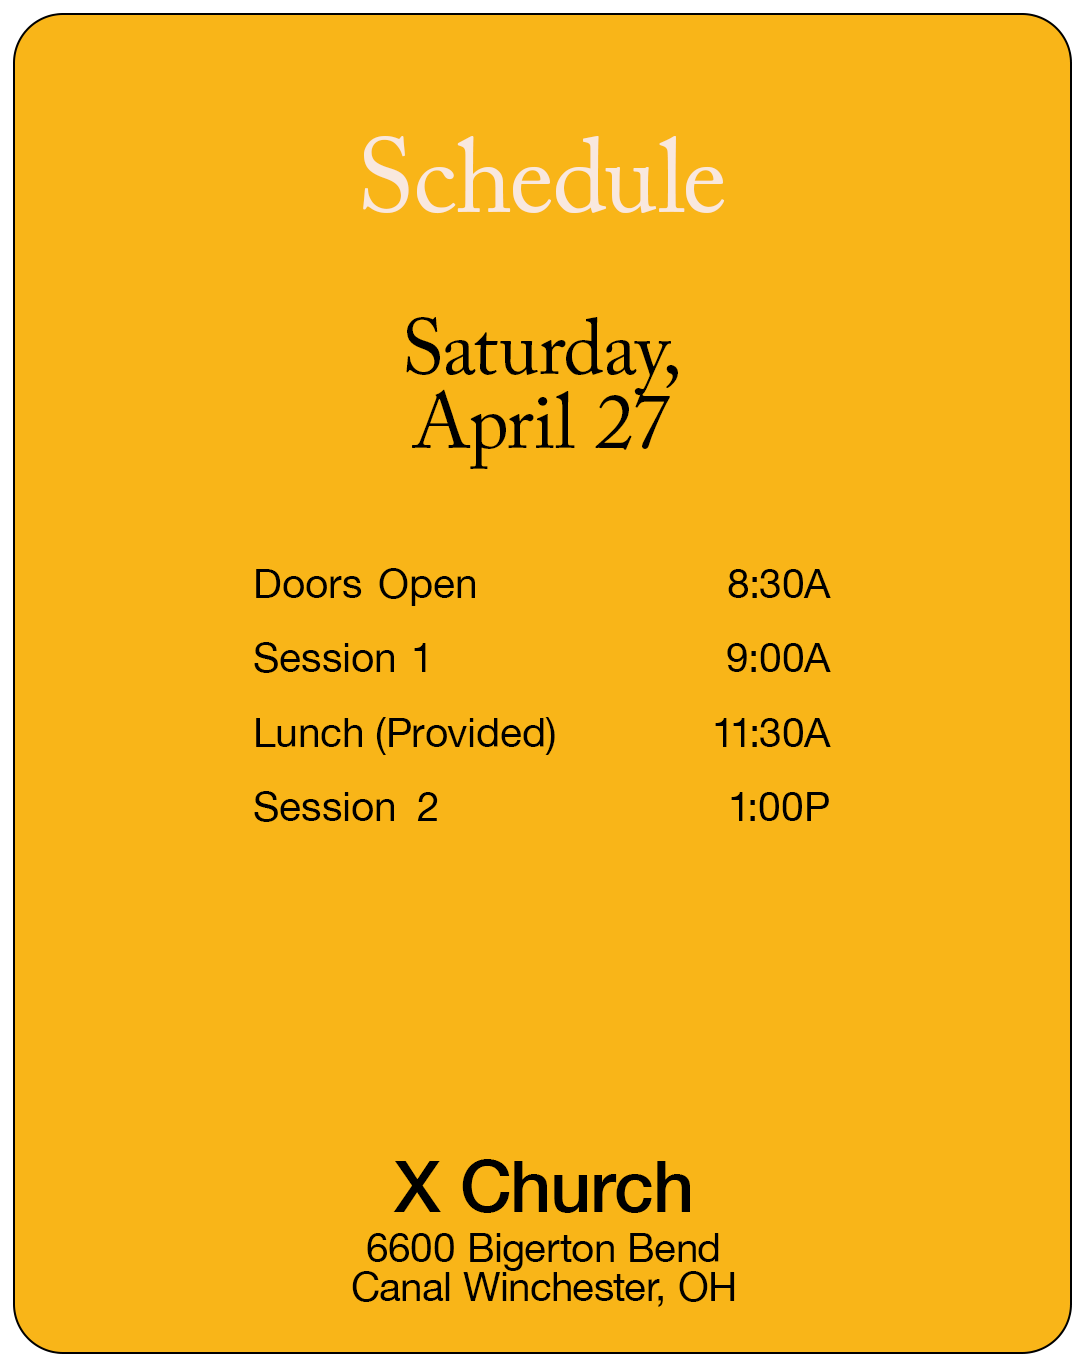 Schedule Saturday, April 24 - Doors Open 8:30A, Session 1 9:00A, Lunch (Provided) 11:30A, Session 2 1:00P X Church 6600 Bigerton Bend Canal Winchester, OH